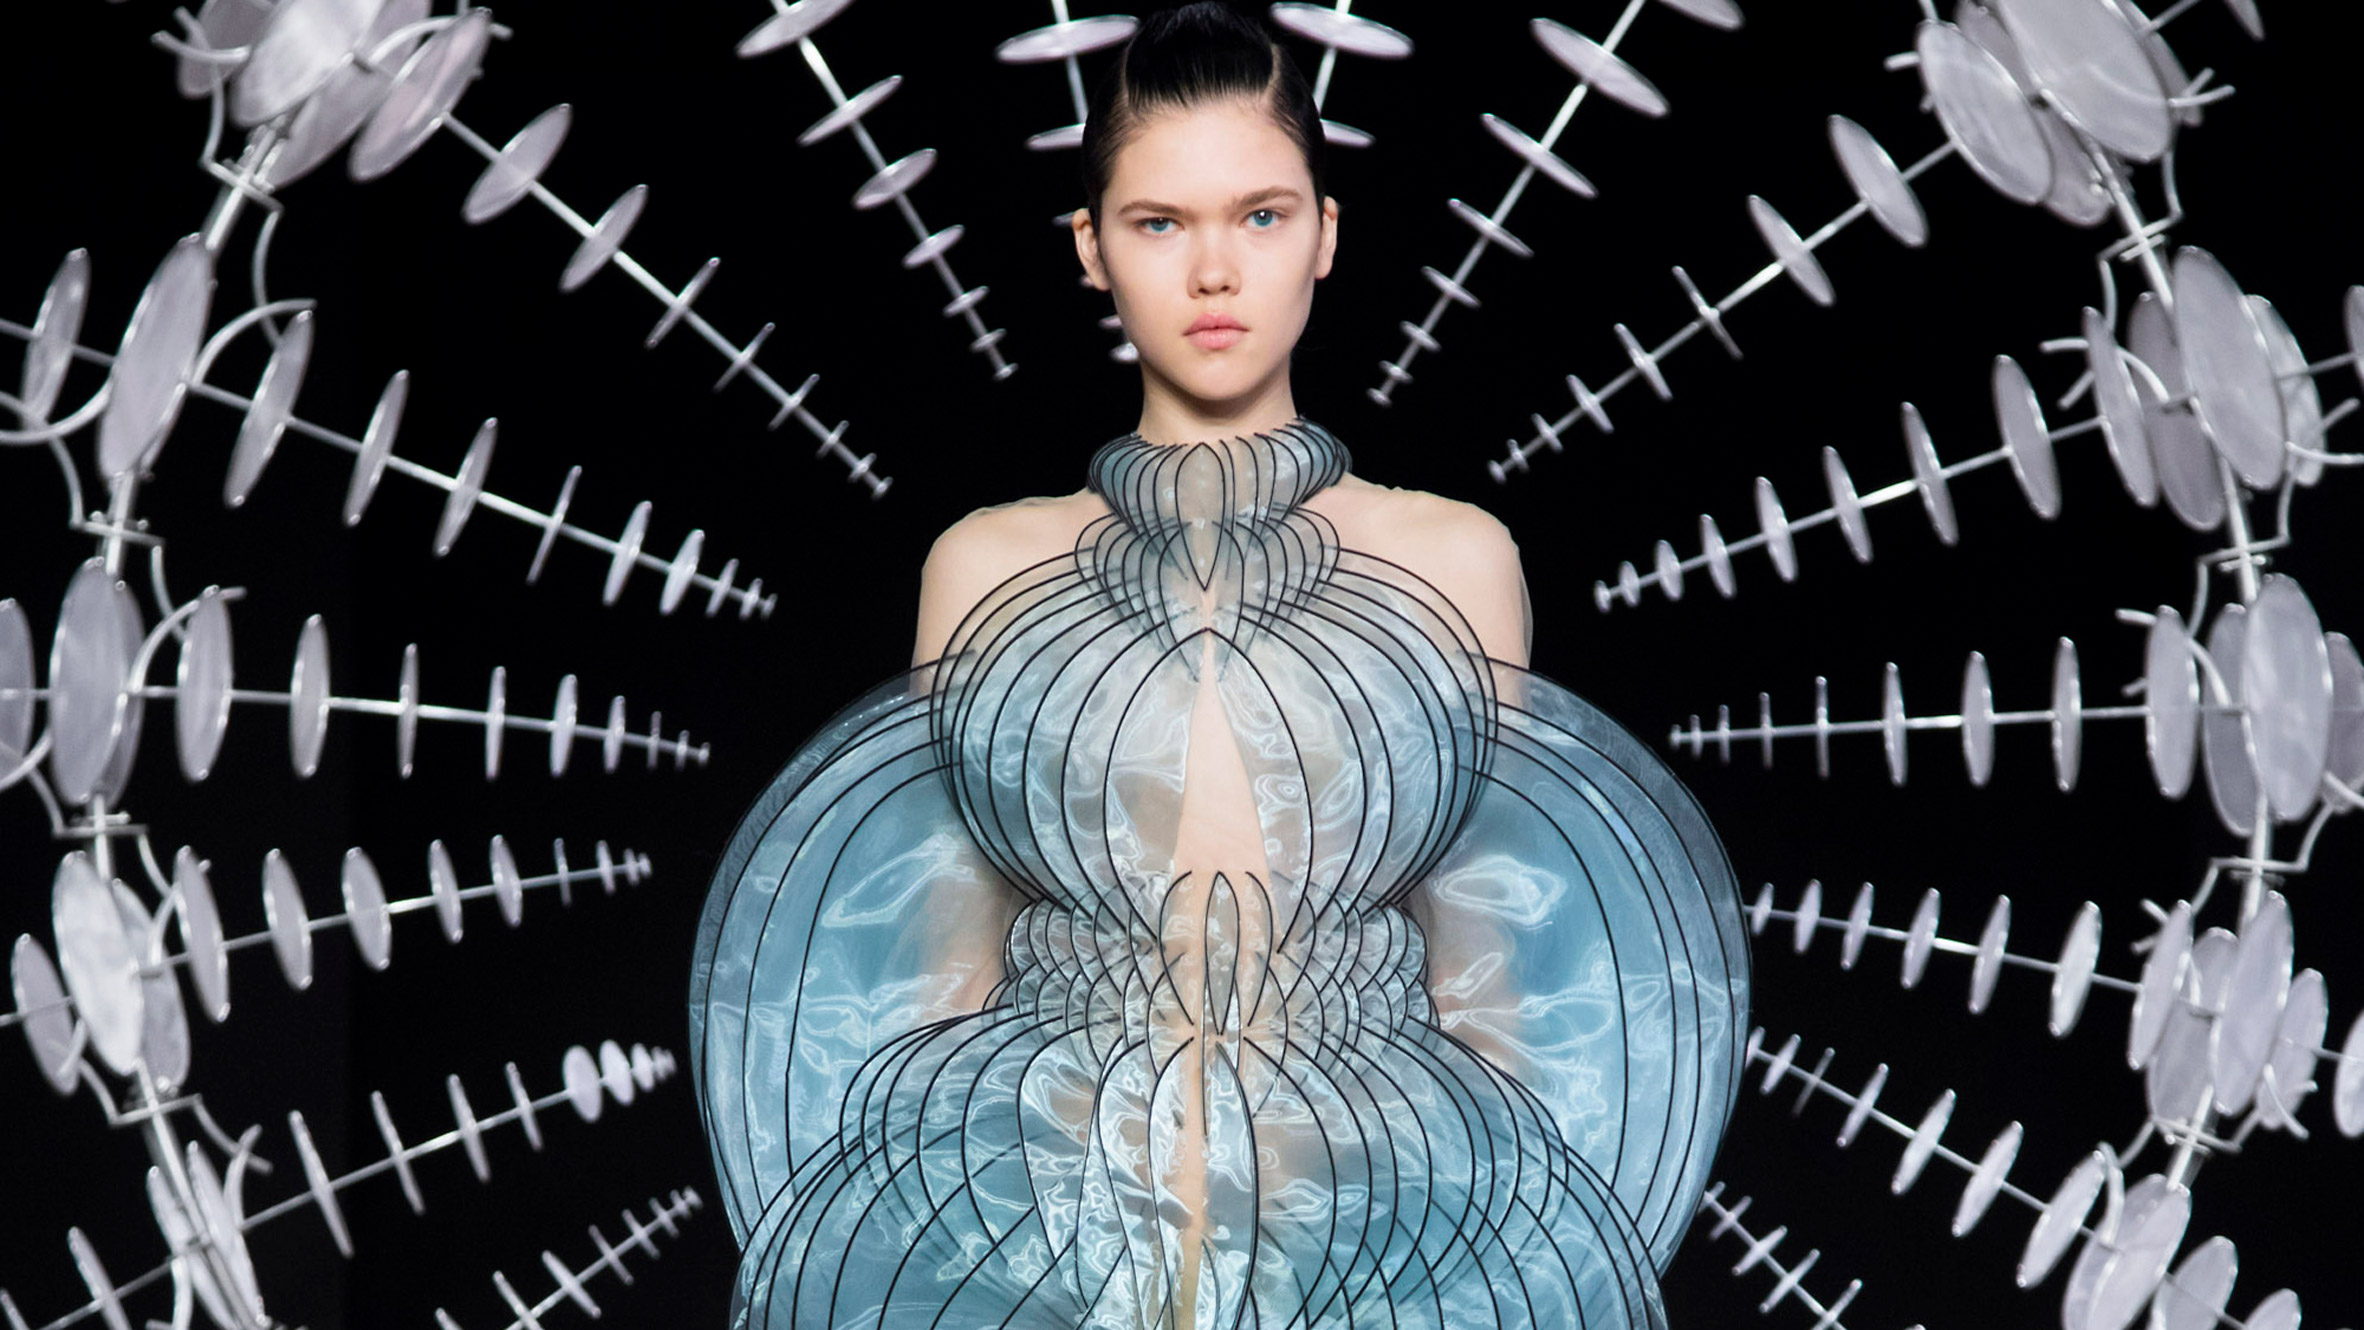 Iris van Herpen emulates a state of hypnosis for latest couture collection